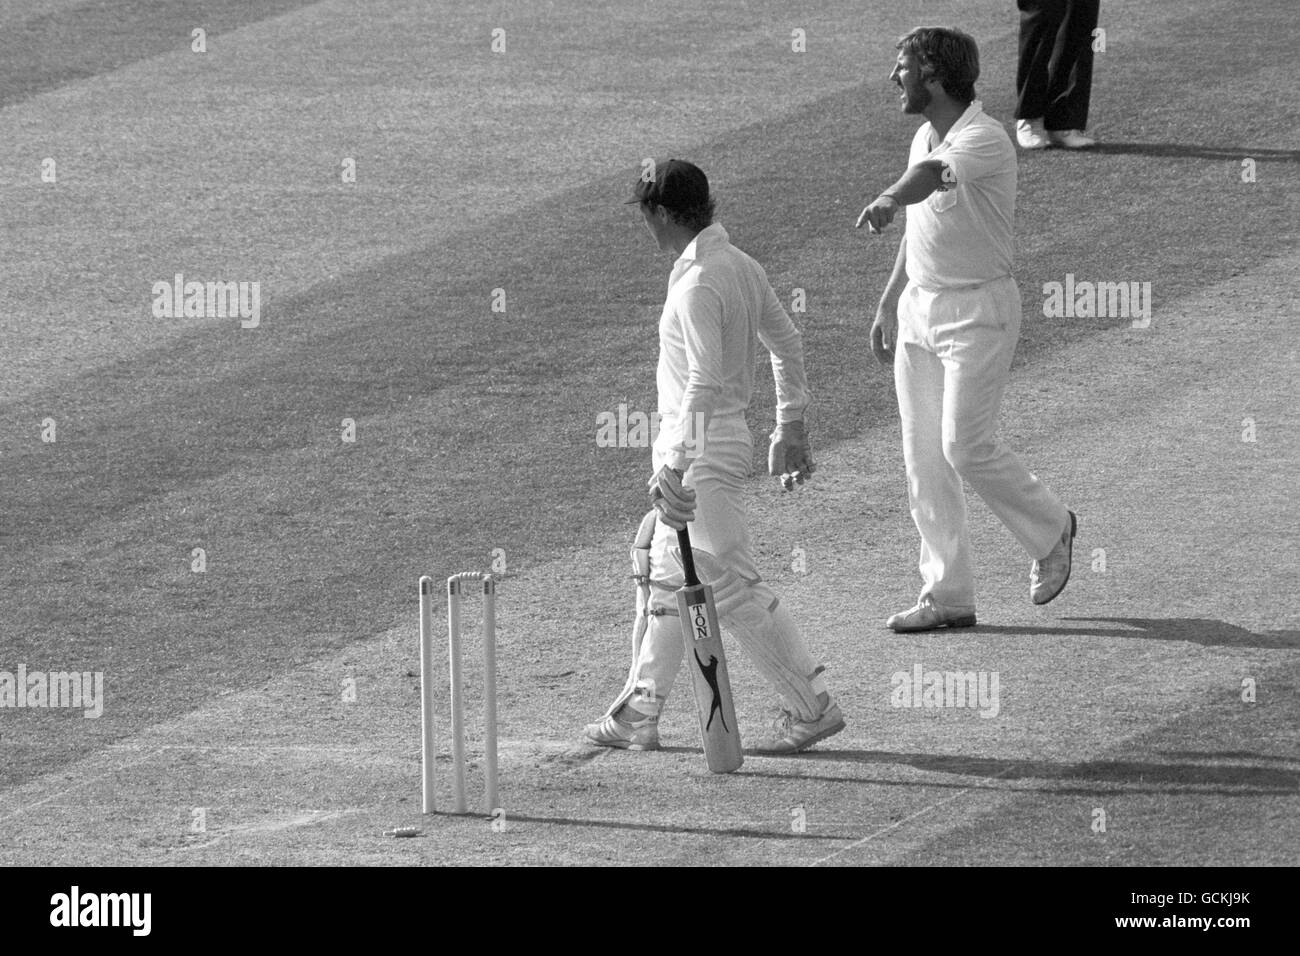 England's Ian Botham points to the fallen bail on the ground as Australia's captain Kim Hughes starts to walk back to the pavilion. Kim Hughes was out to Botham when he hit wicked for 31, after his front foot slid onto the wicket after a hook shot, although at first no-one noticed. Stock Photo